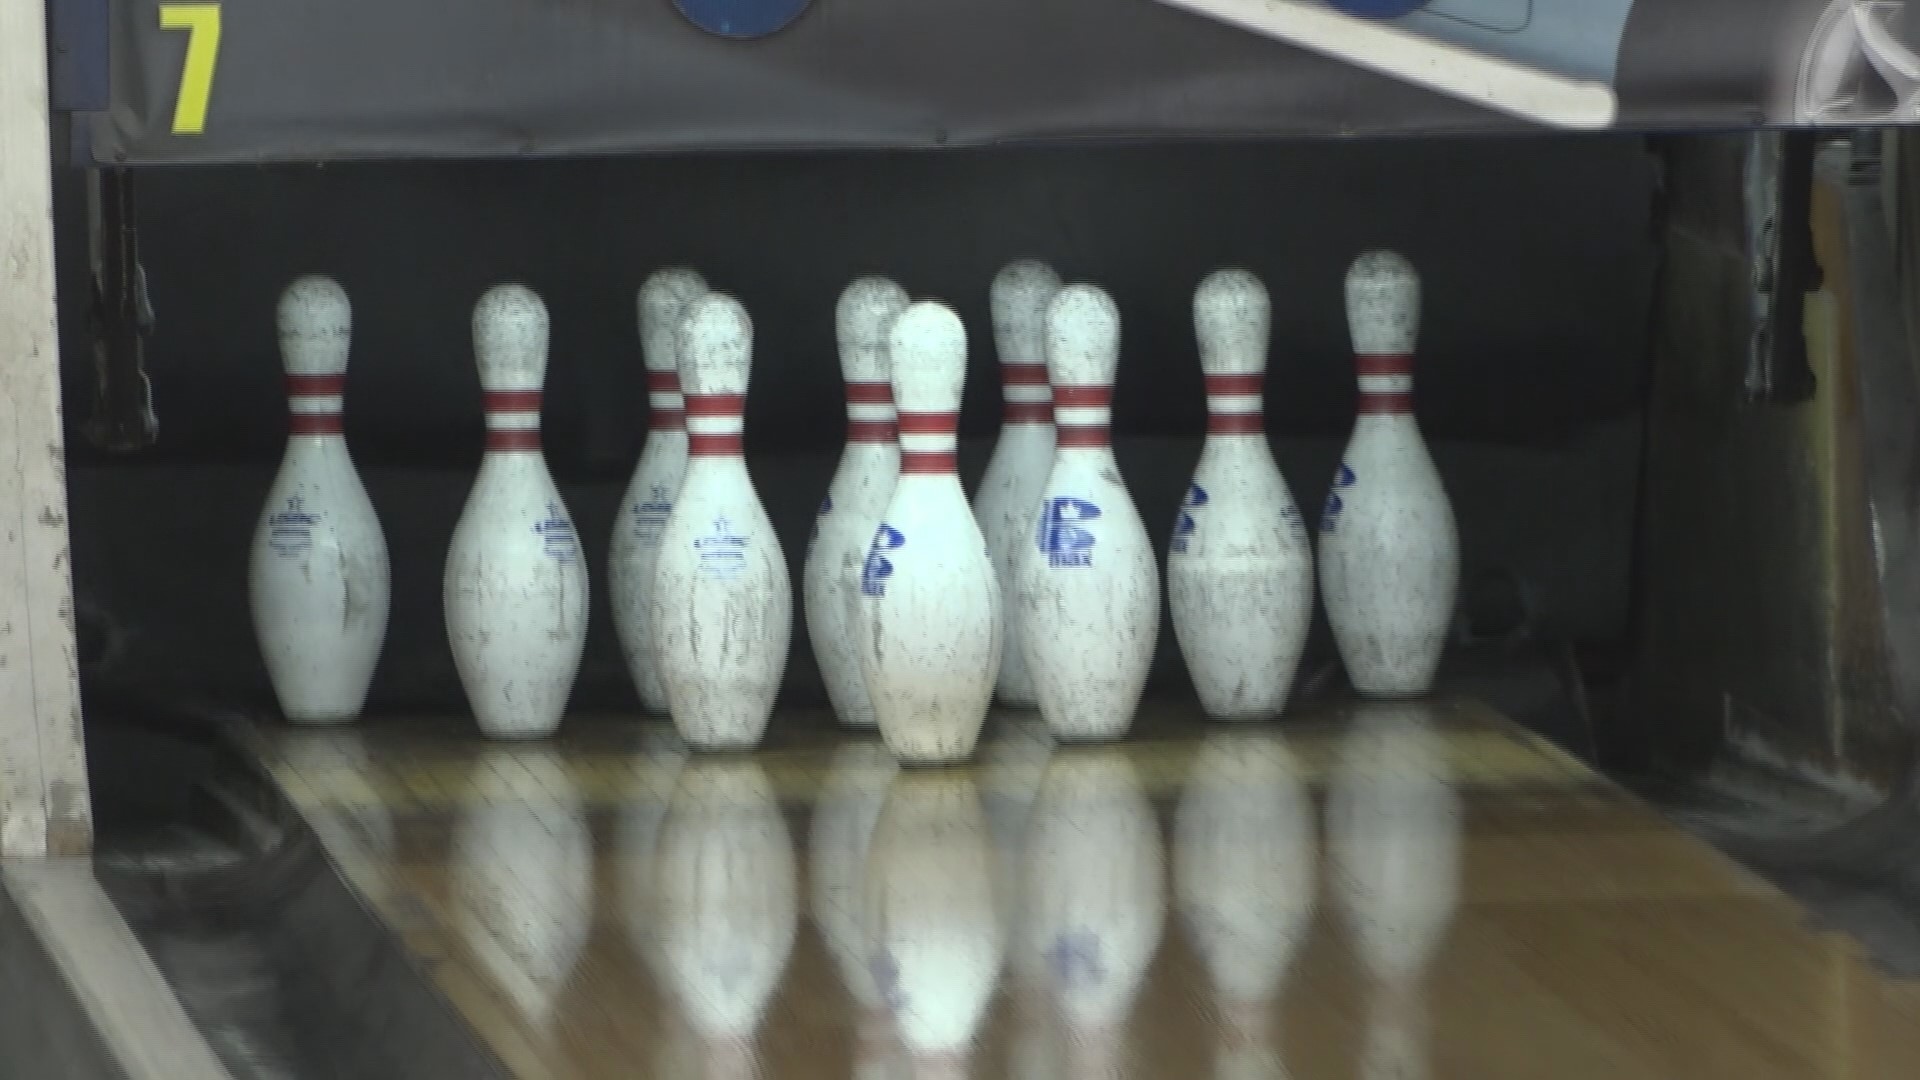 There are several bowling alleys to choose from,
but a bowling alley Show Me St. Louis' Malik Wilson recently visited comes with a history lesson.